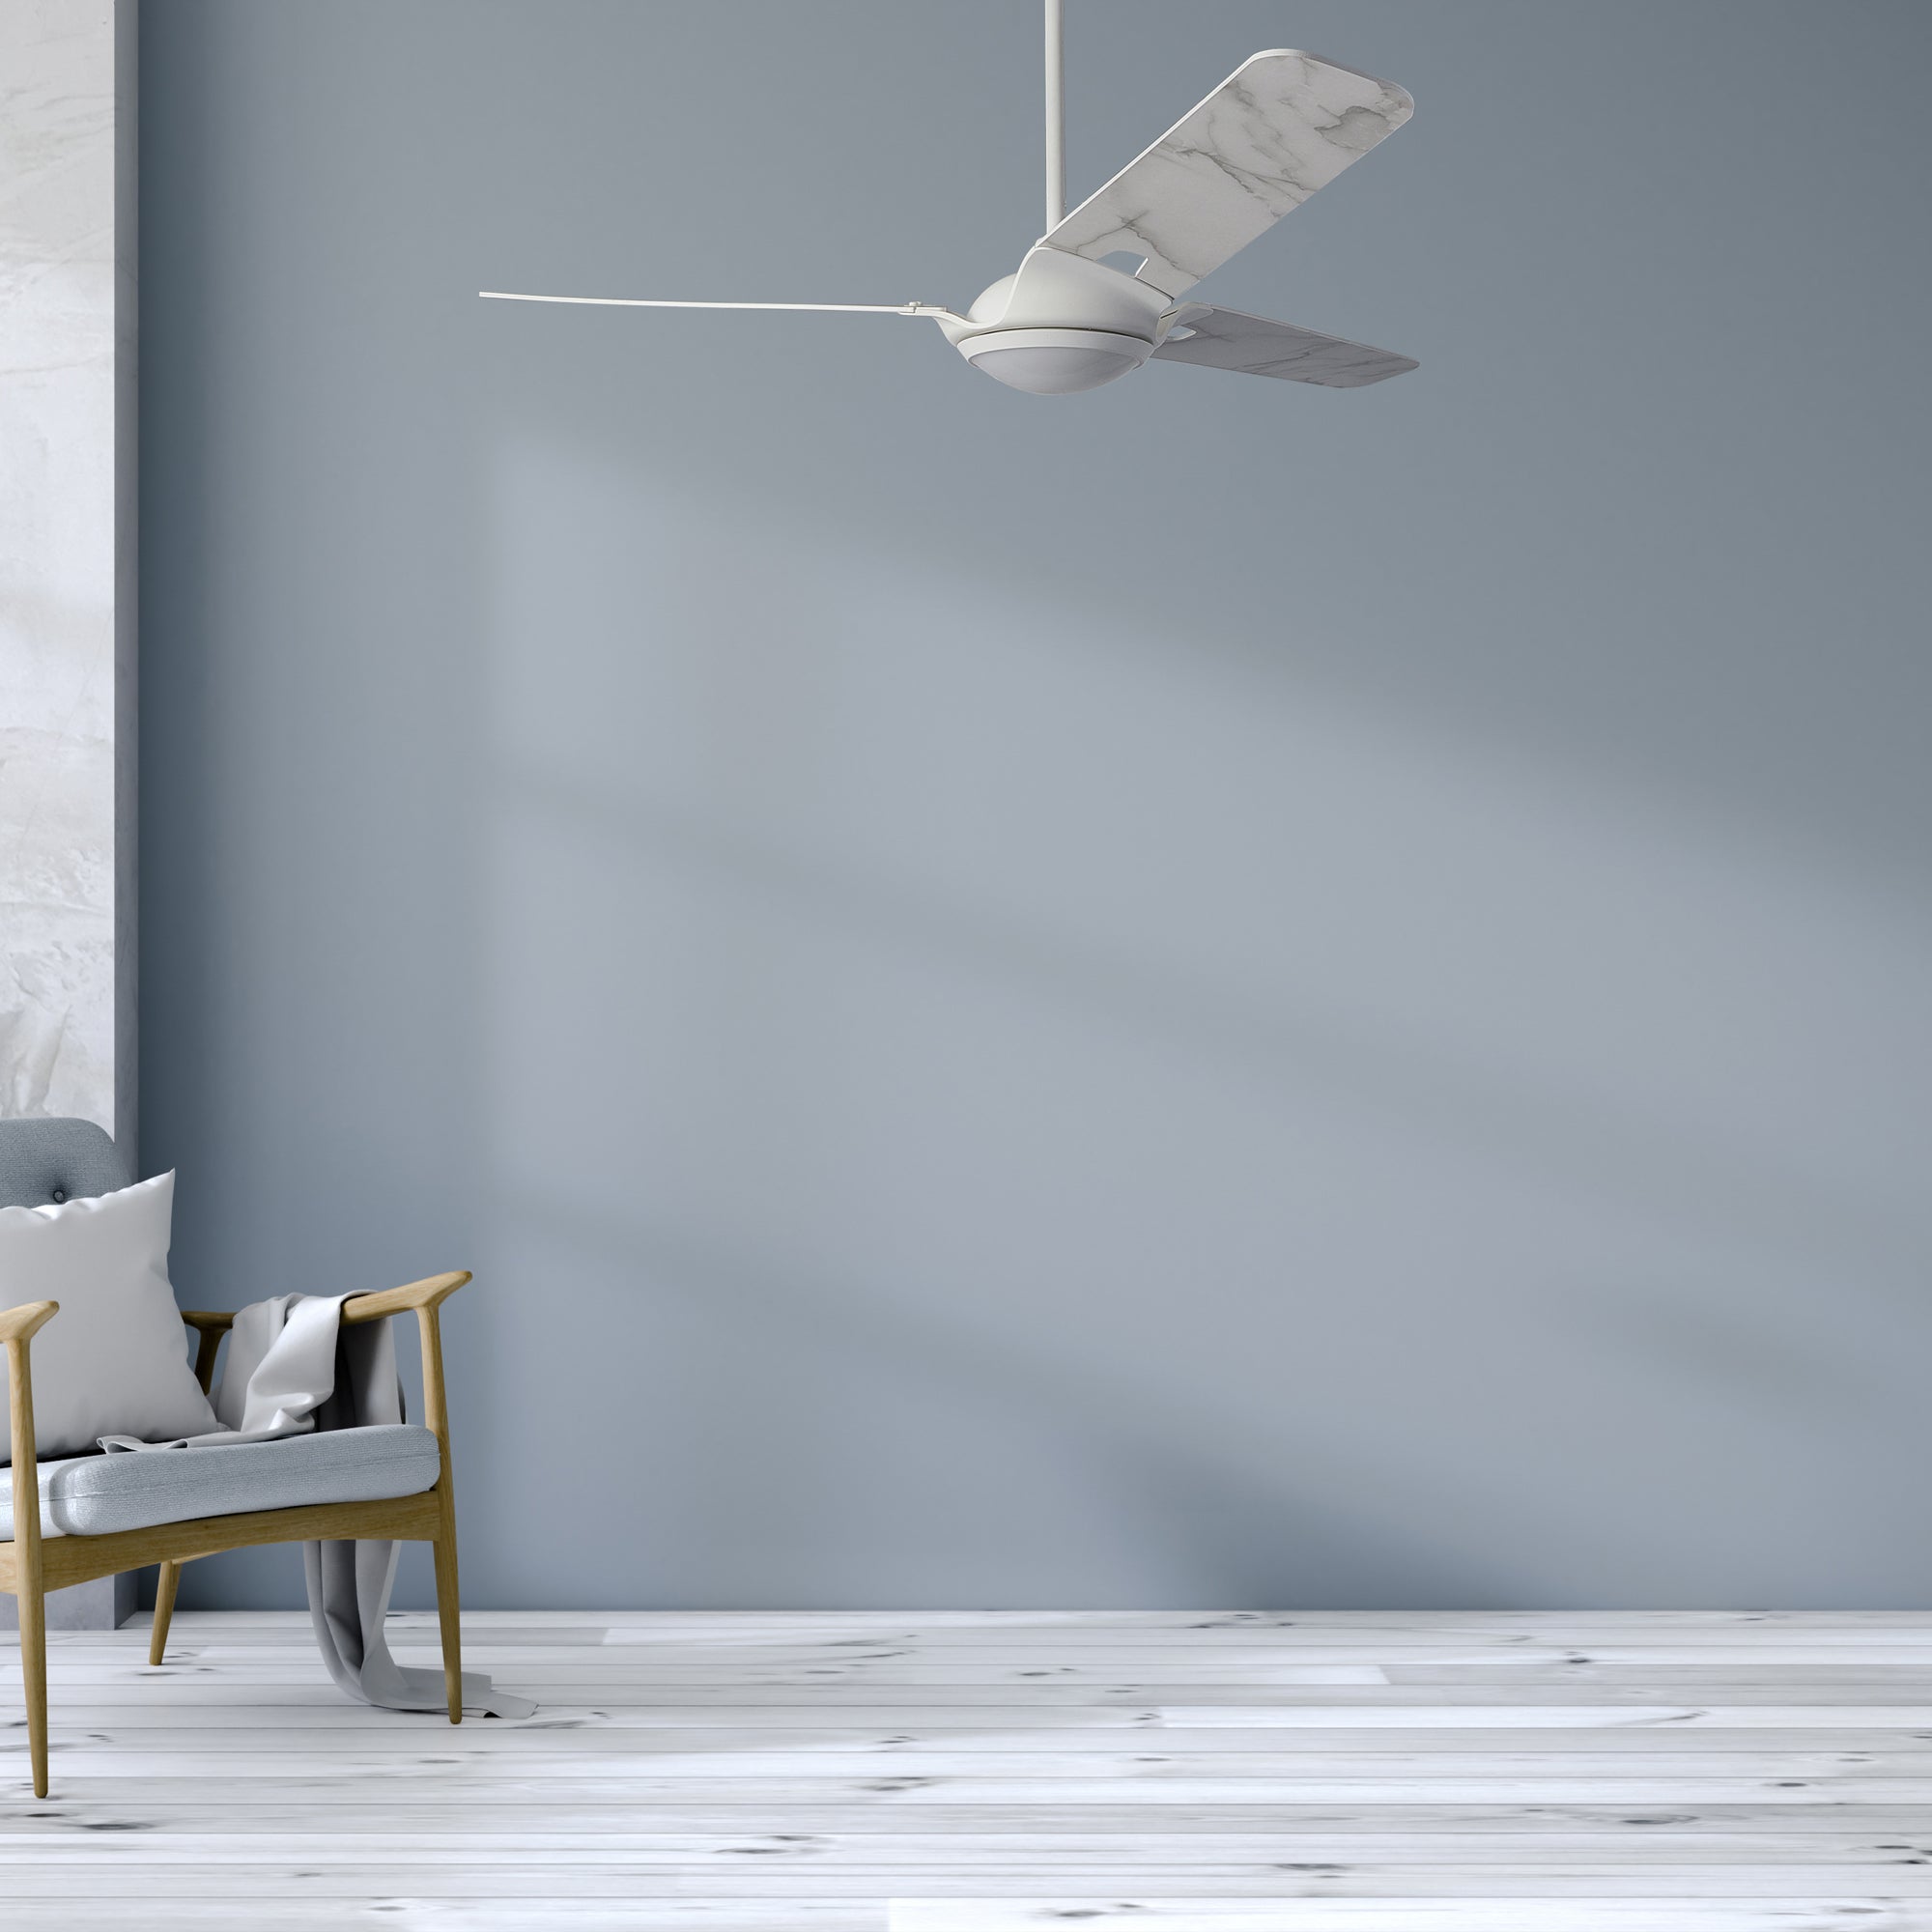 The Smafan Innovator 52&#39;&#39;smart ceiling fan is a perfect balance of performance and modern design. With a dimmable LED kit with 3 light settings: Cool, Neutral and Warm, 10-speed whisper-quiet DC motor, Alexa, Google Assistant, and Siri enabled, Innovator will fit perfectly any indoor or outdoor space.